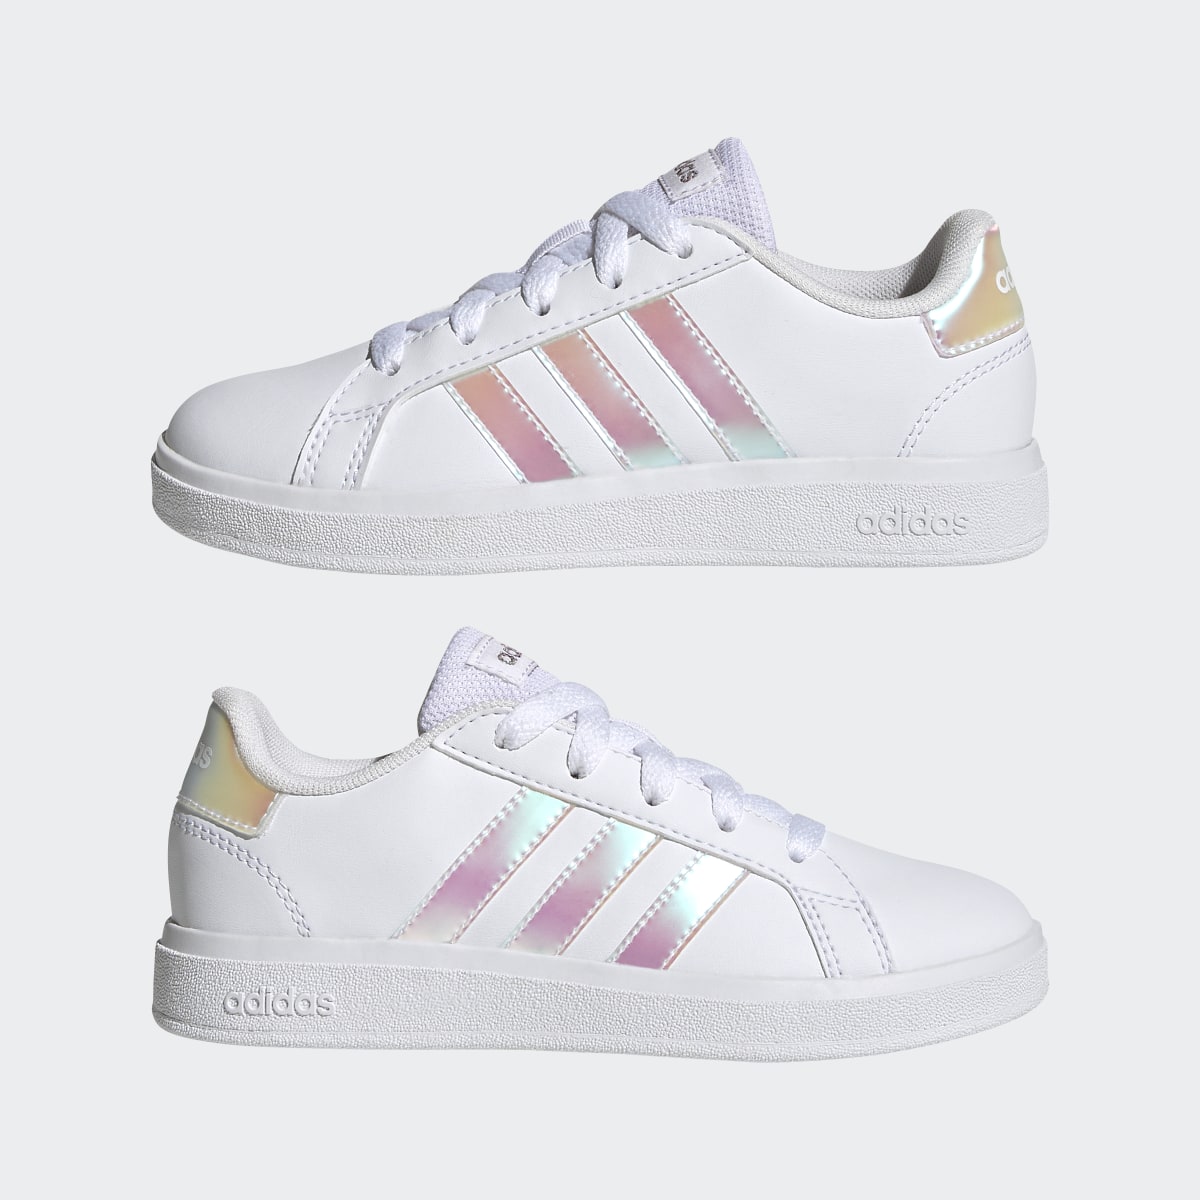 Adidas Grand Court Lifestyle Lace Tennis Shoes. 8